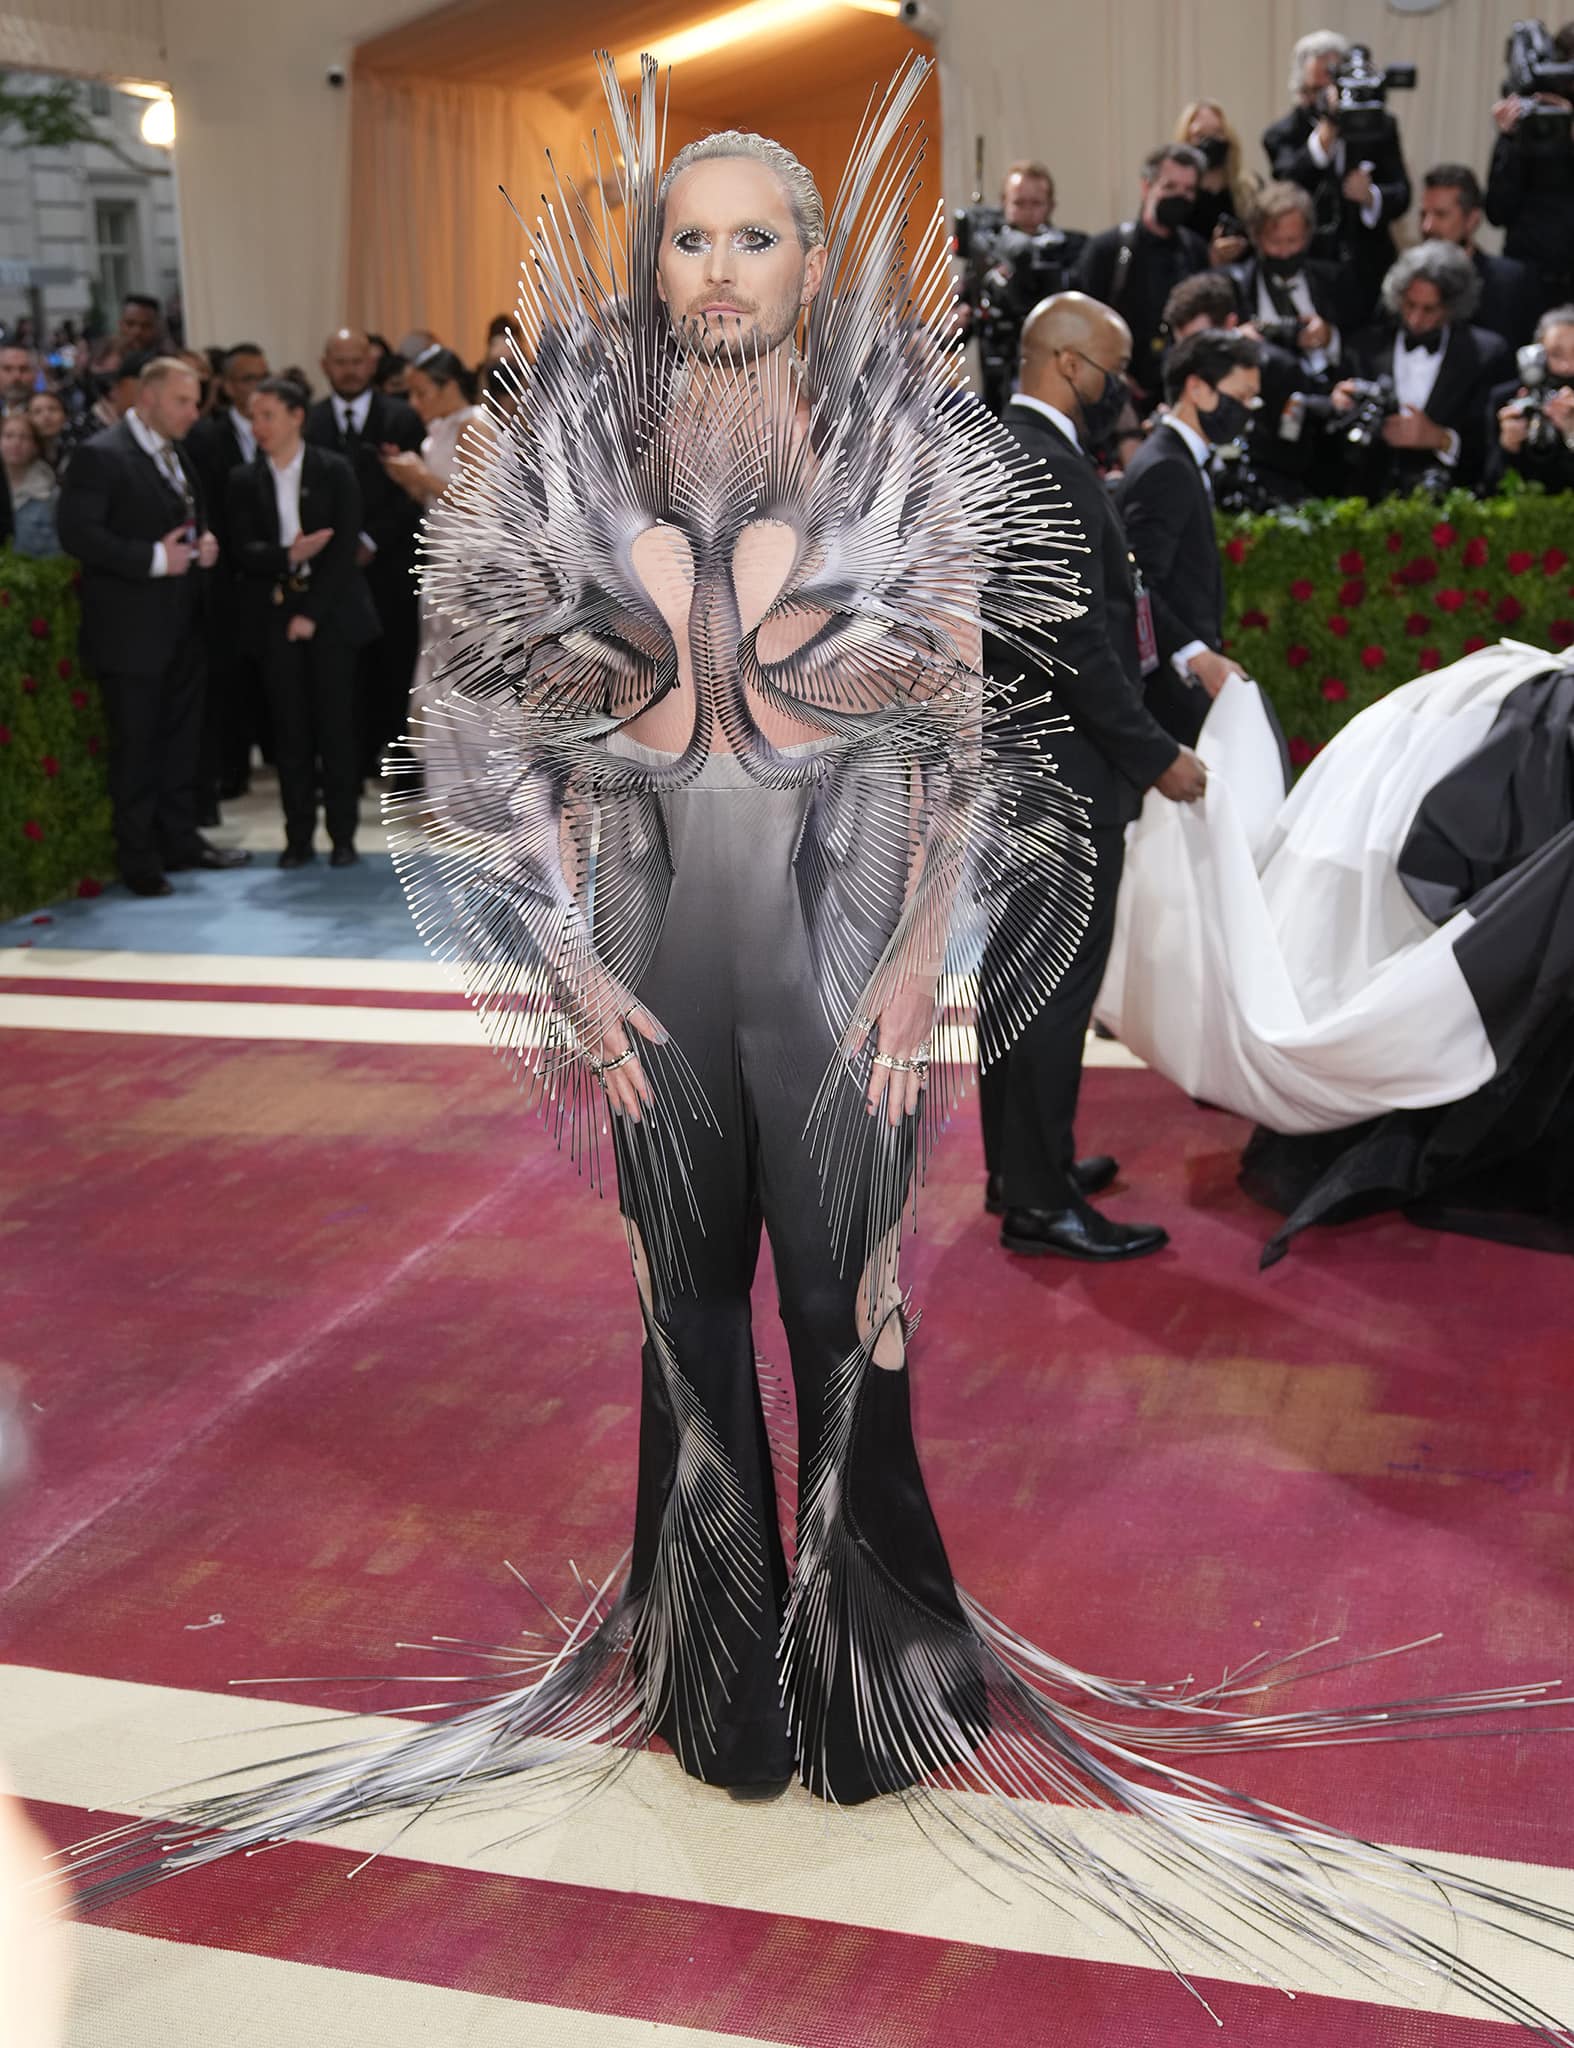 Fans and reporters confuse Swedish style star Fredrik Robertsson for Jared Leto at the 2022 Met Gala red carpet